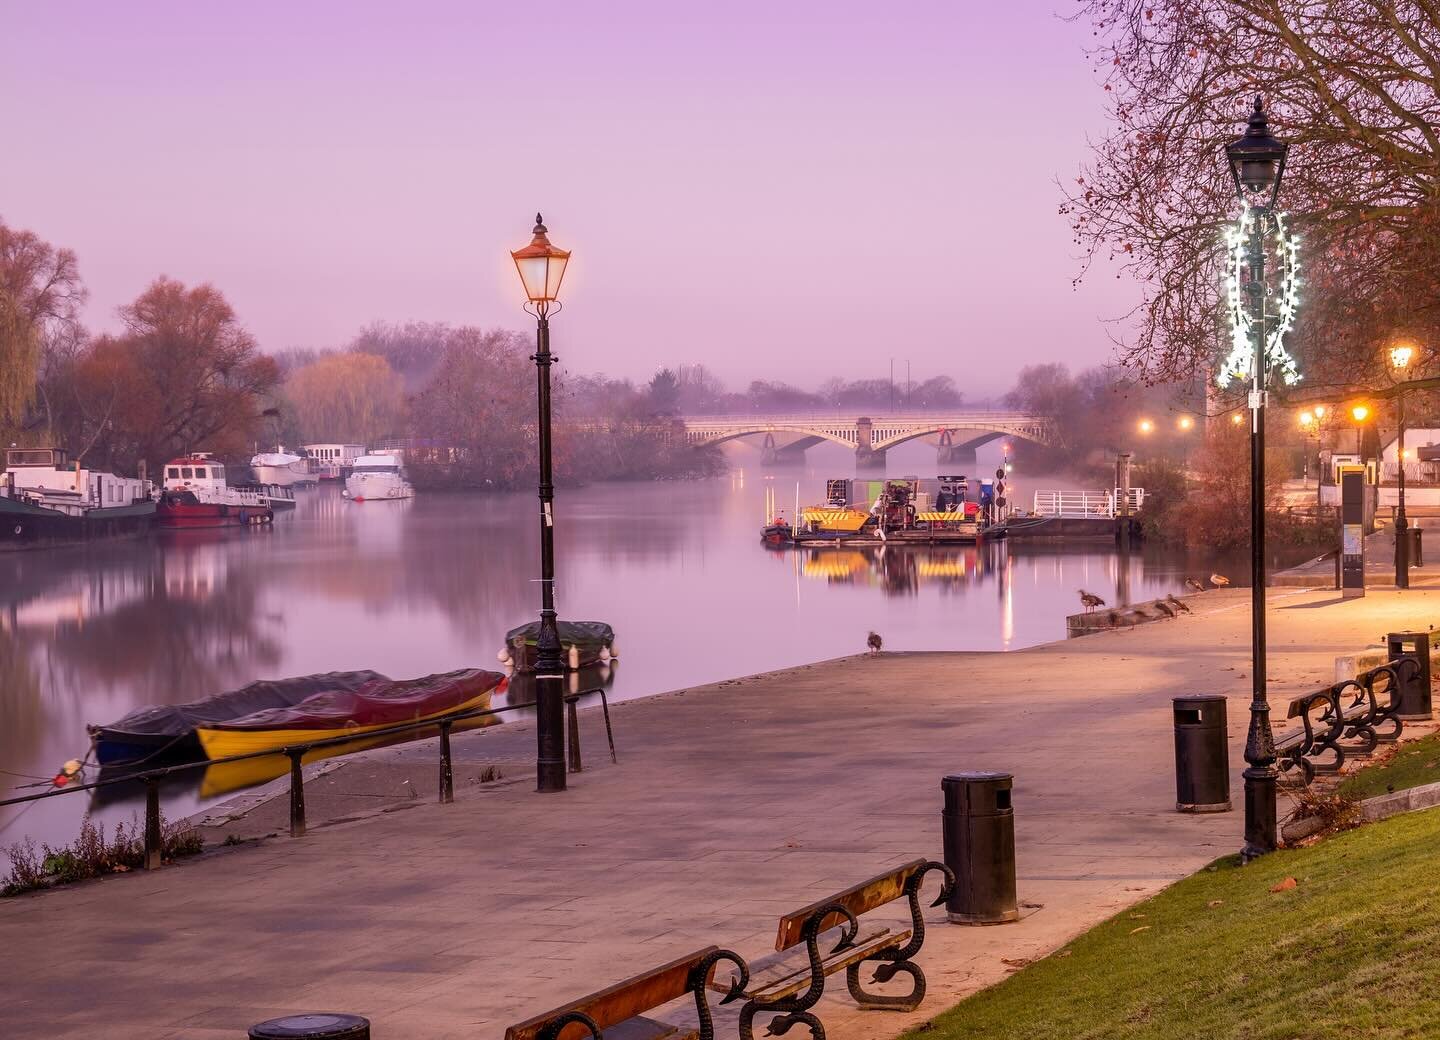 According to Rightmove&rsquo;s latest Happy at Home study, the borough of Richmond upon Thames has been voted the happiest place to live, this is the first time that a location within the capital has taken the top spot.

The borough offers residents 